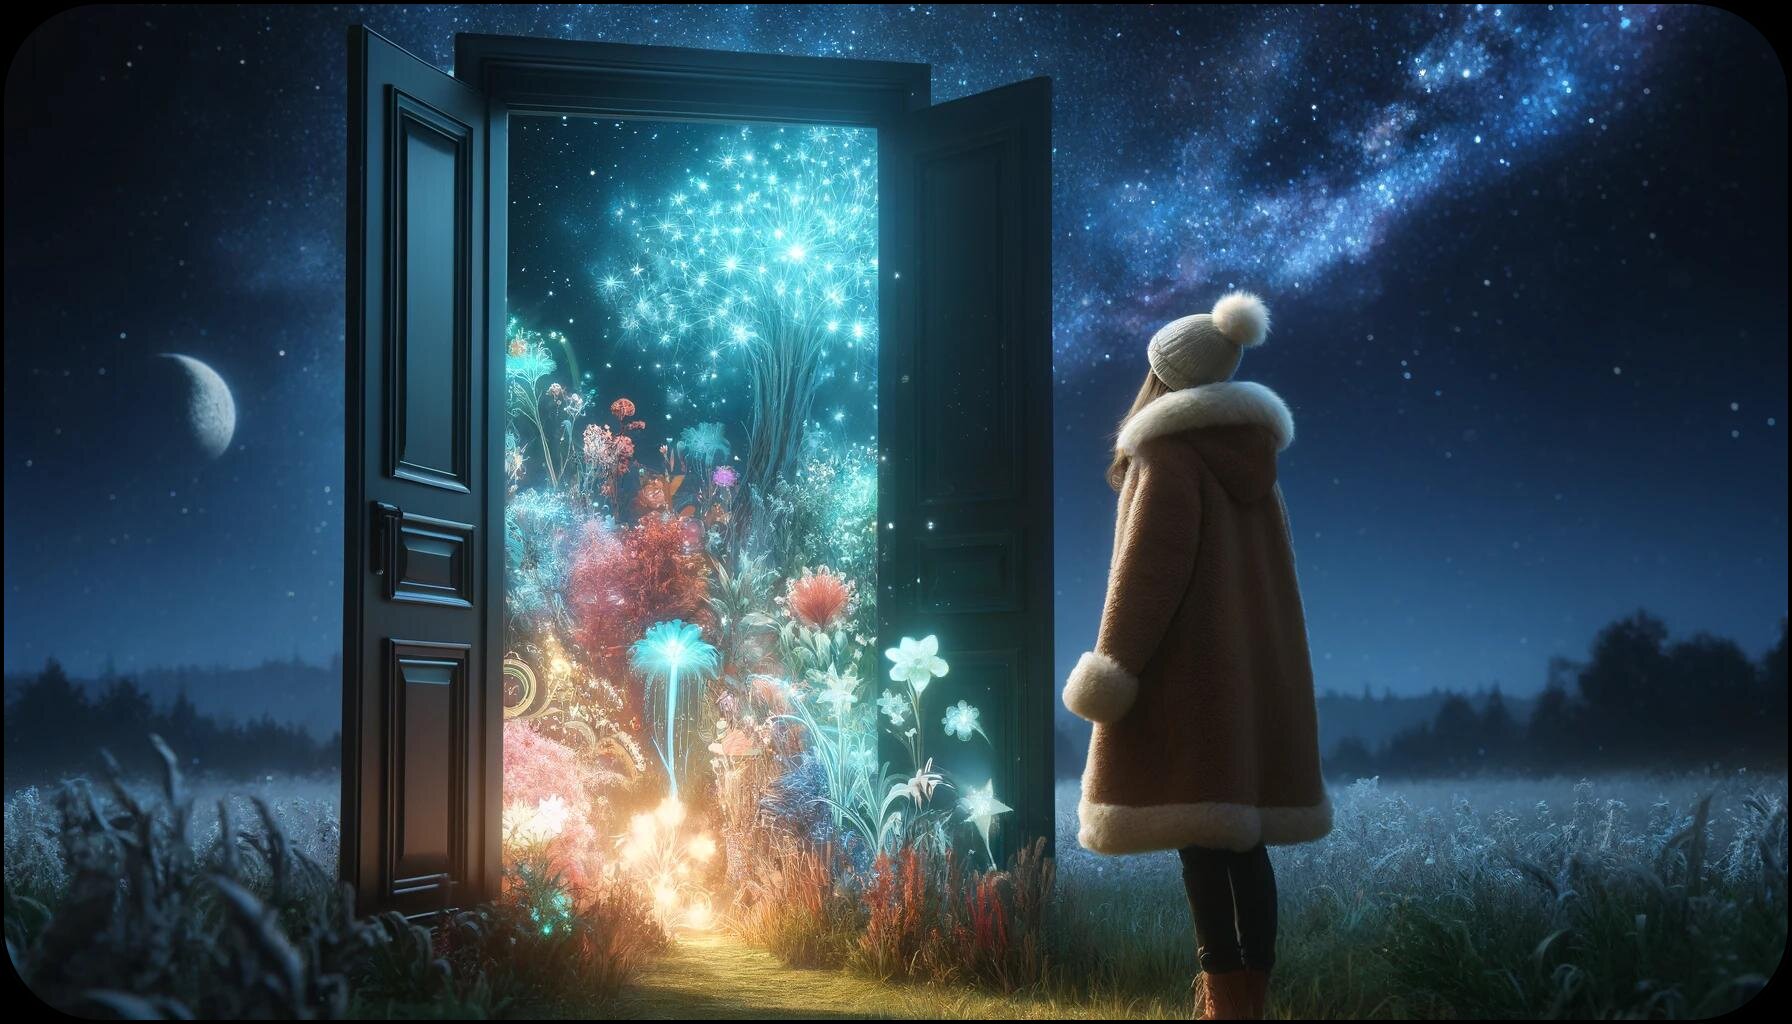 A young woman gazing into a dreamy, surreal world through the open door.